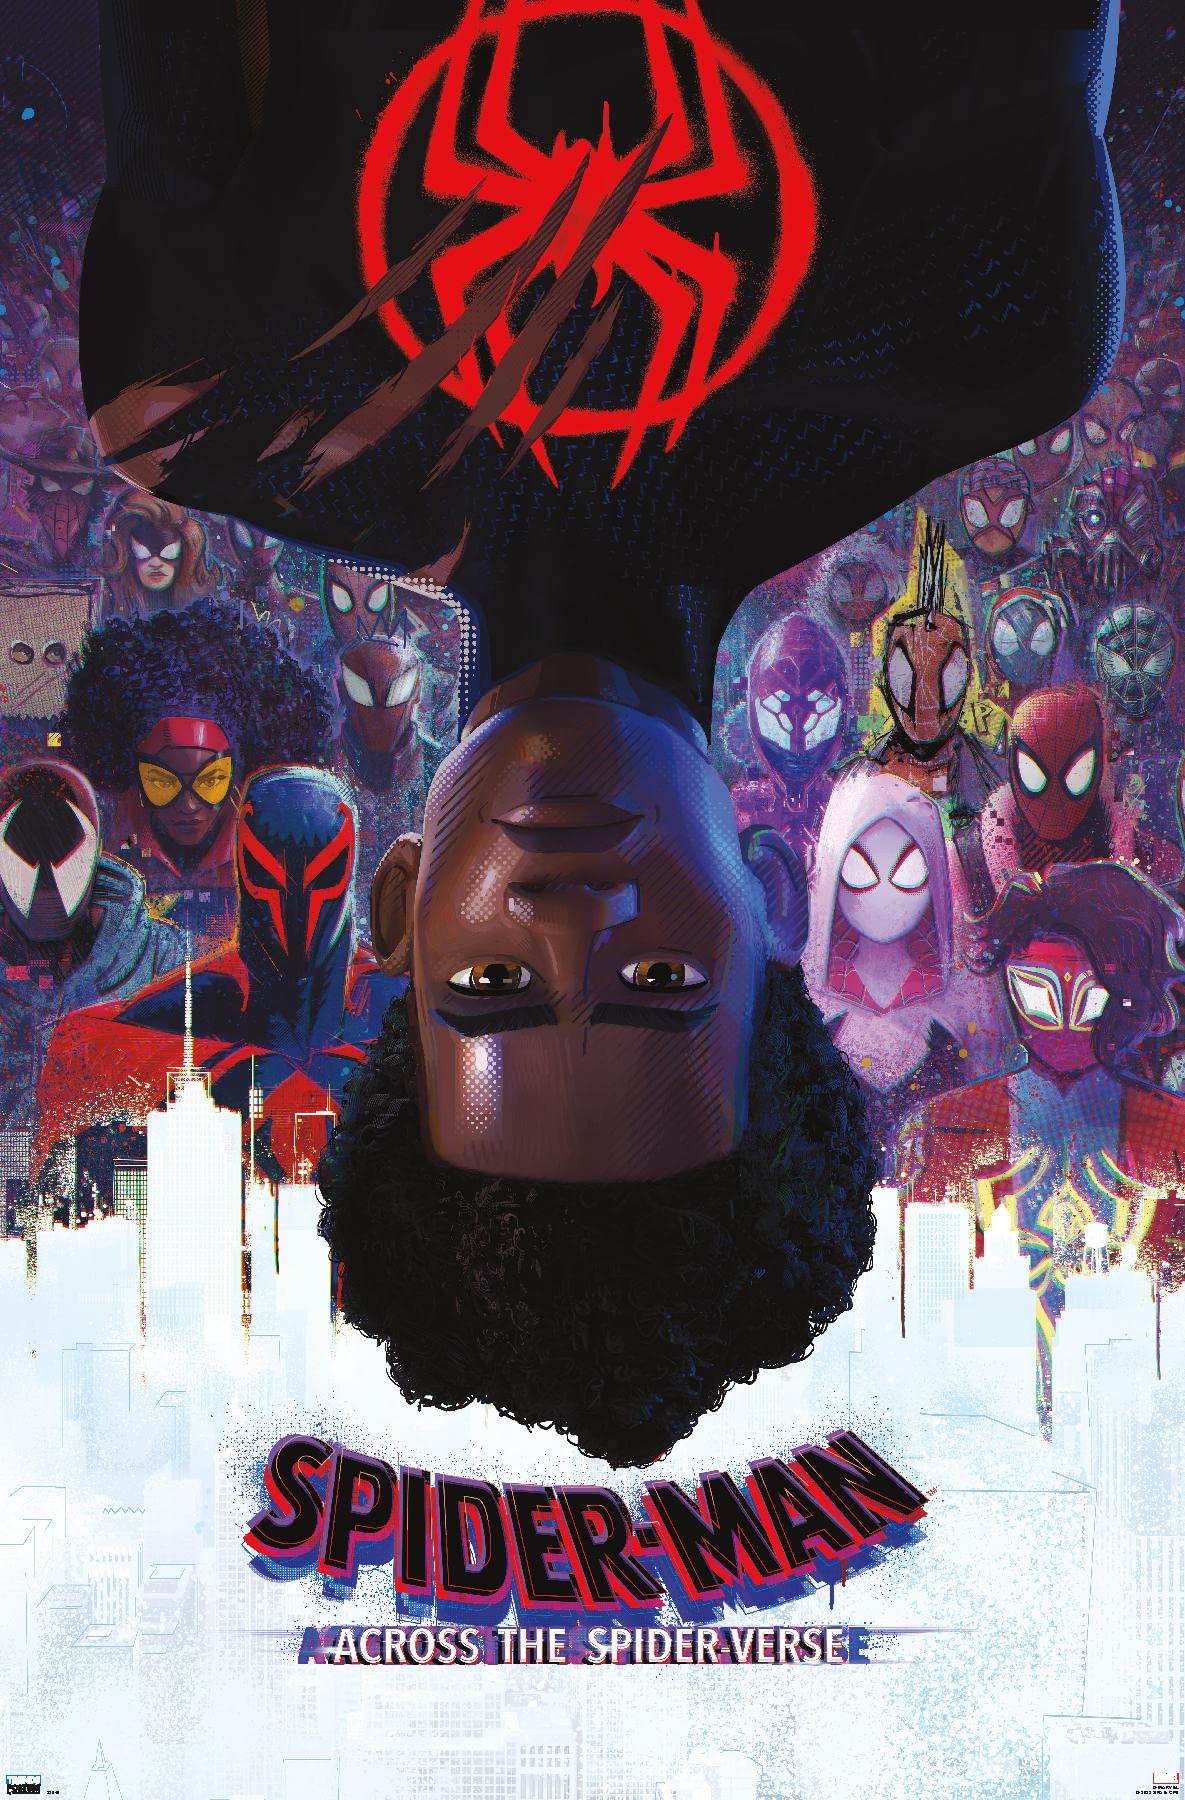 Spiderman-Across the Spider-Verse poster